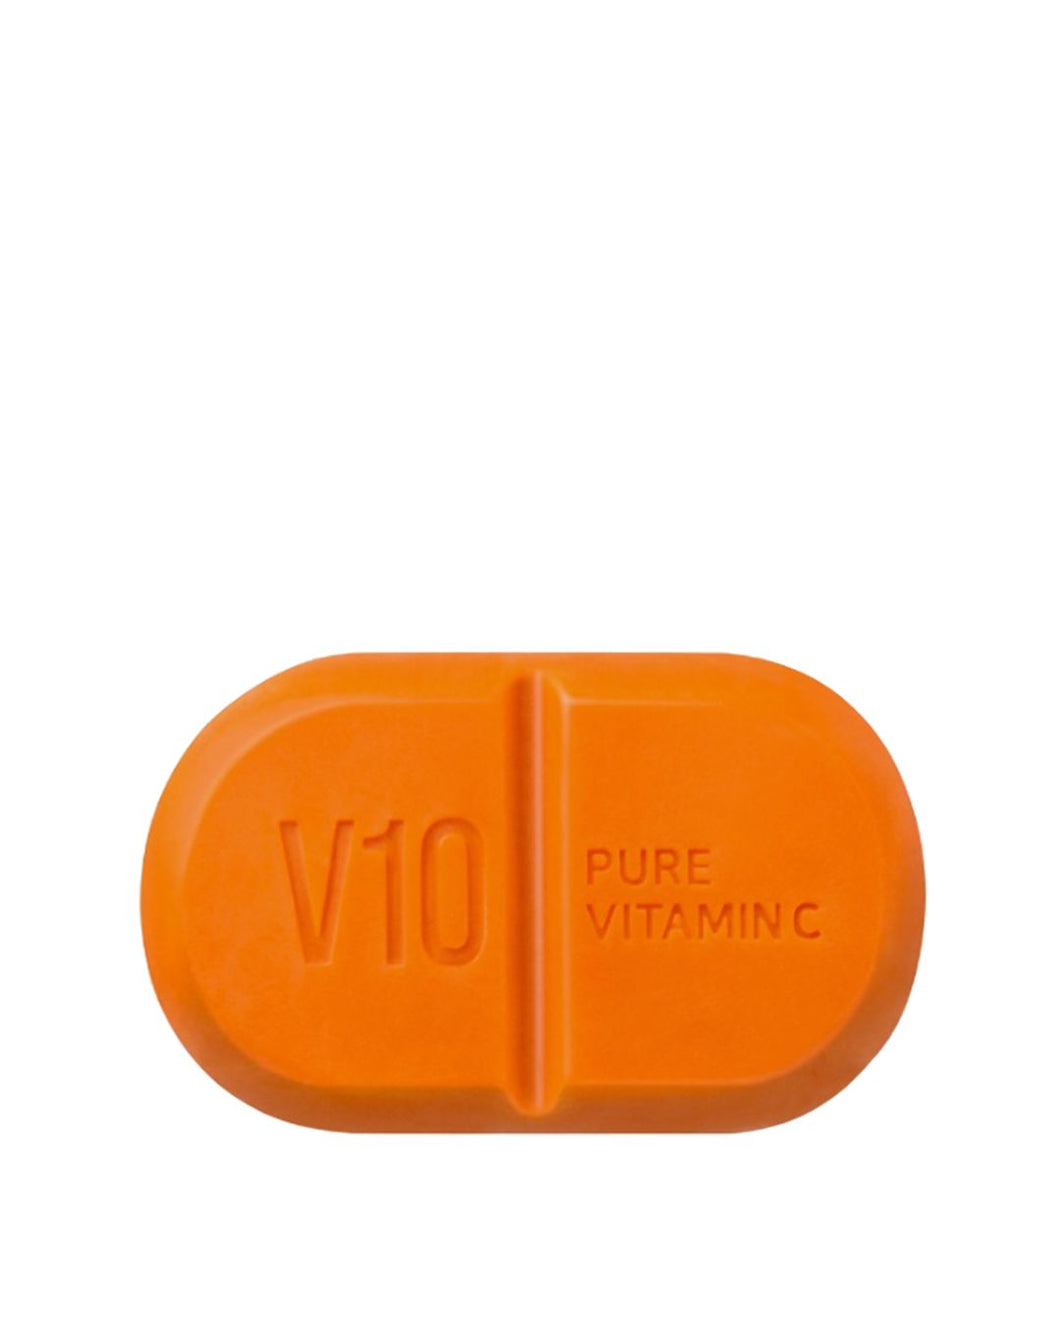 SOME BY MIPure Vitamin C V10 Cleasing Bar